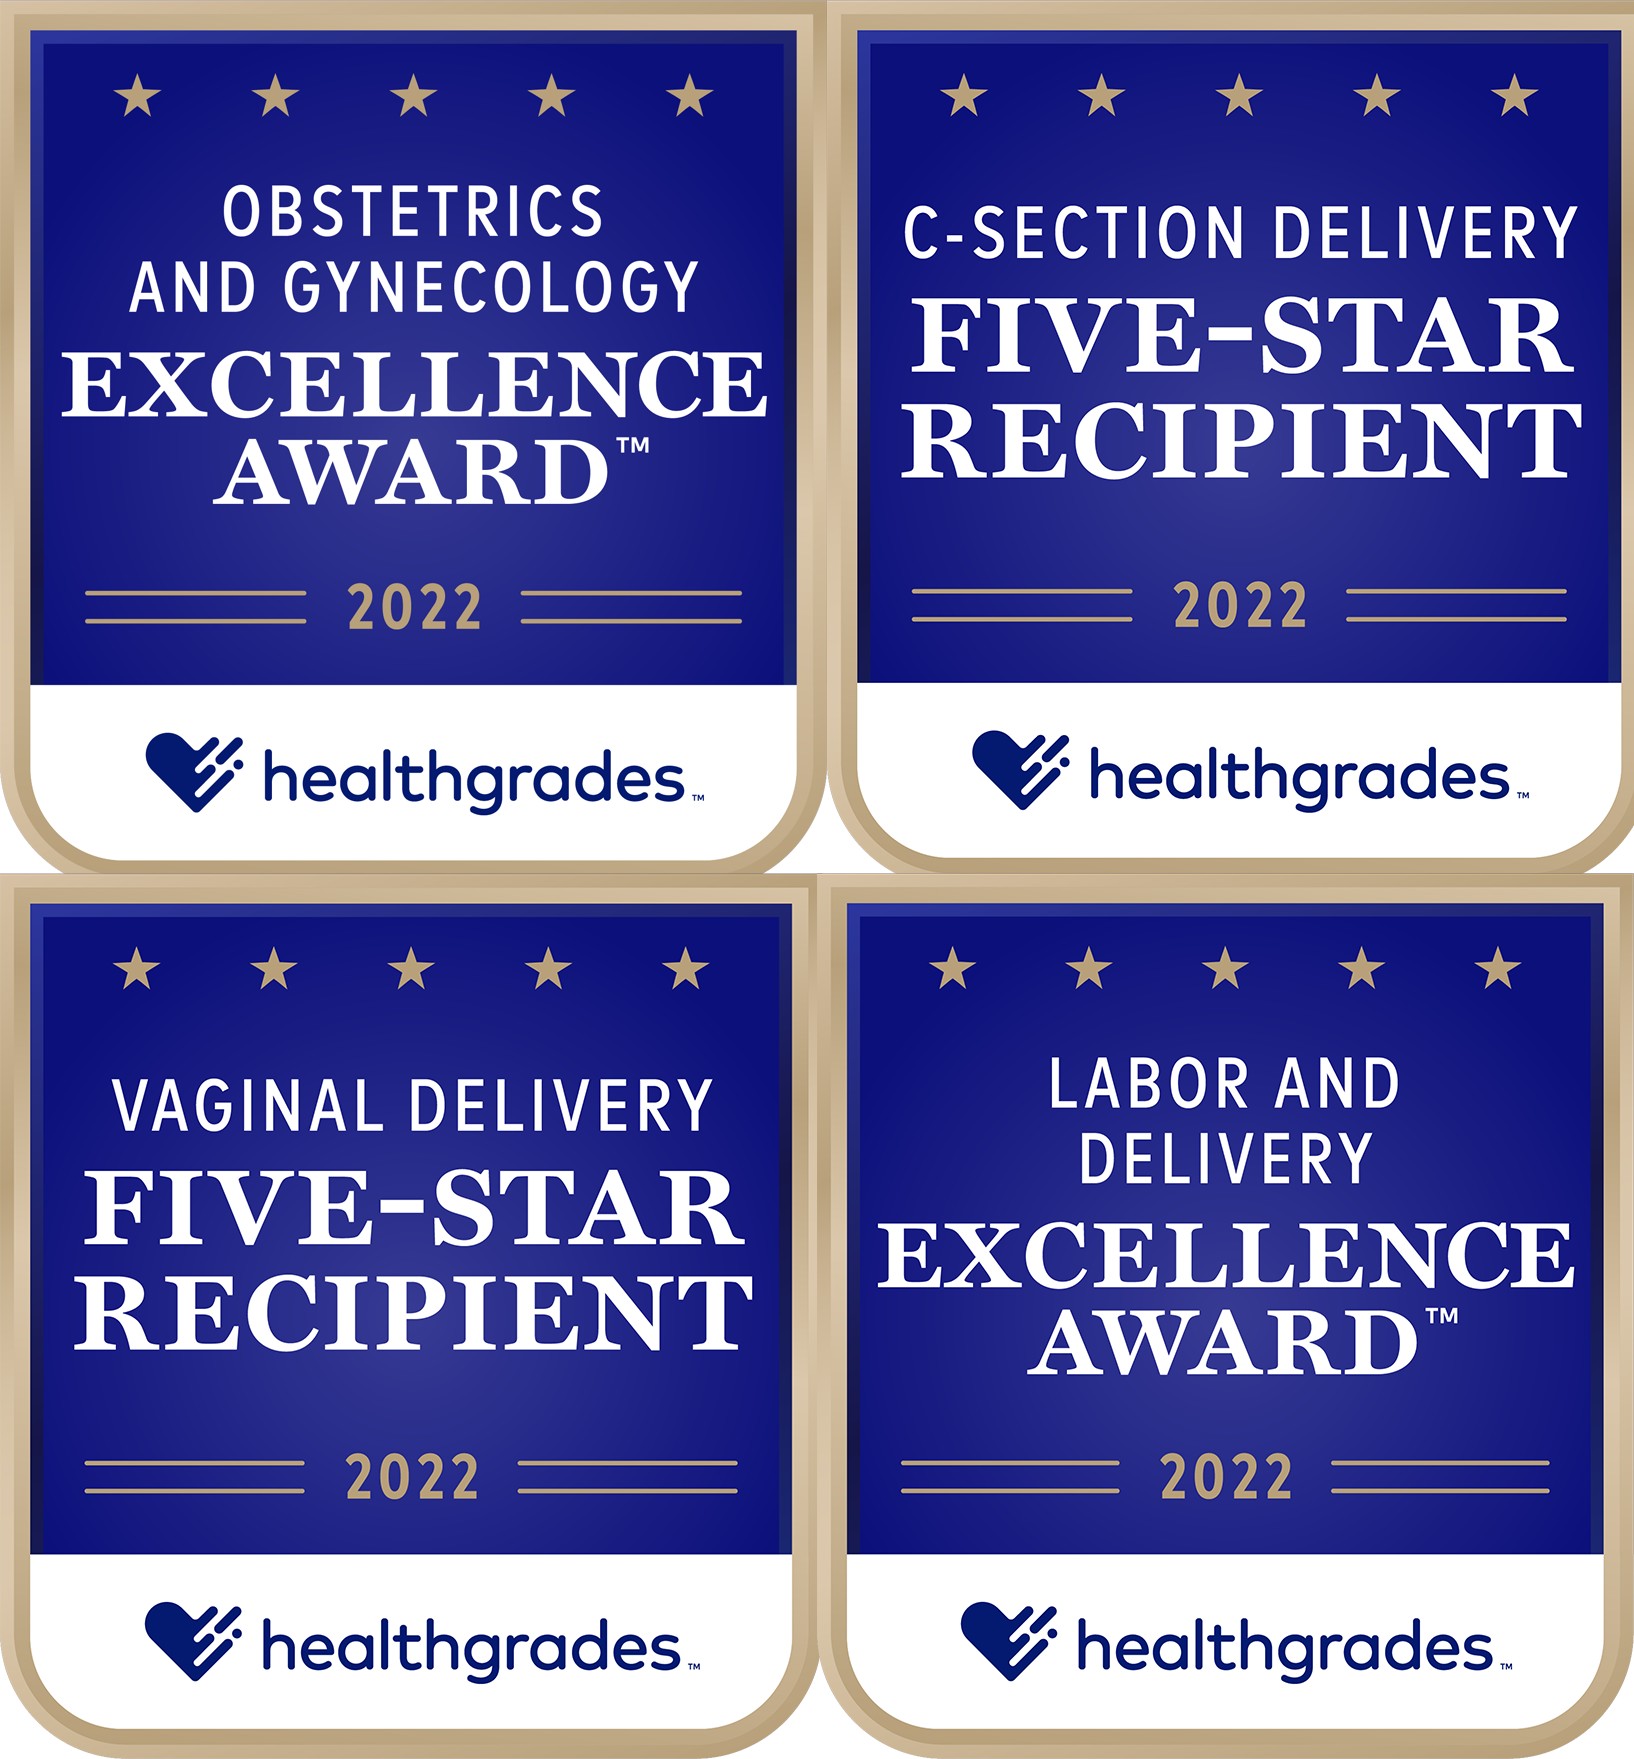 HCA Florida Orange Park Hospital has earned national recognition from Healthgrades for its superior performance in Labor and Delivery and Obstetrics and Gynecology care.